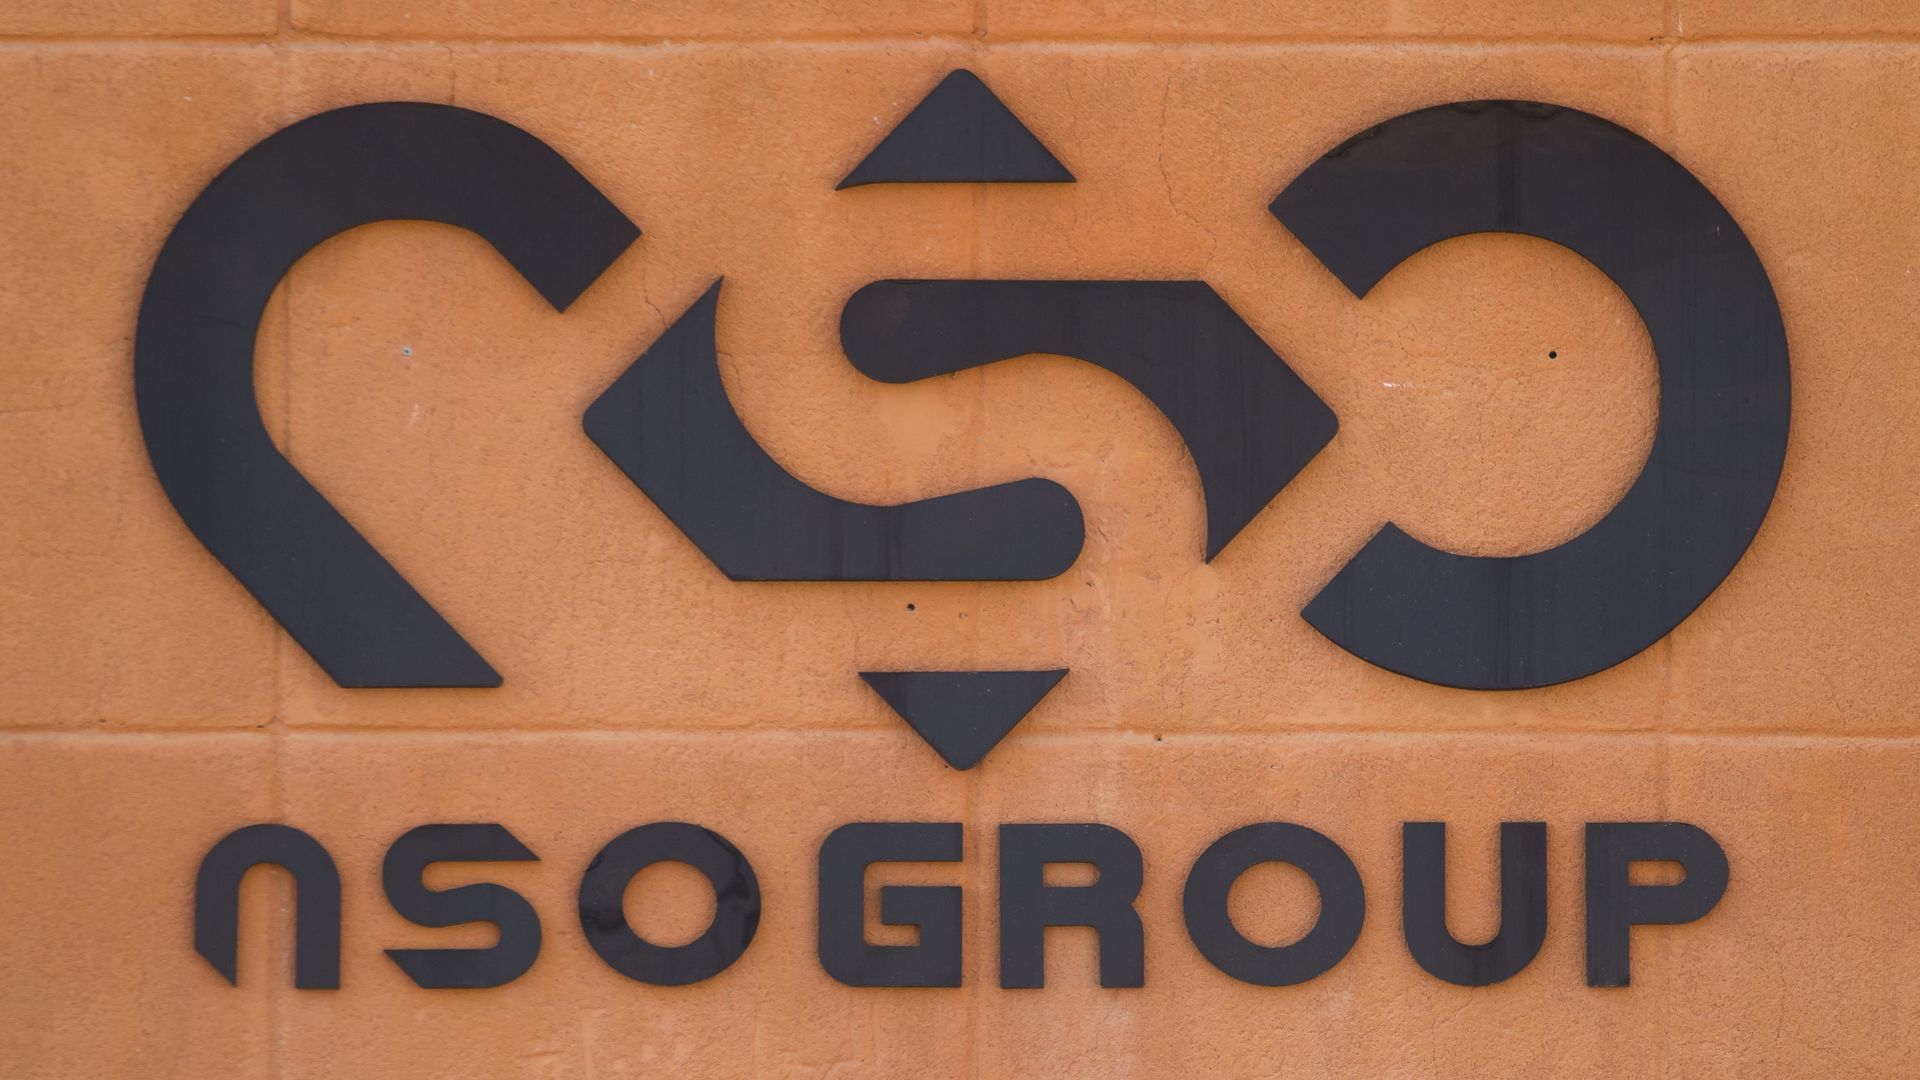 Photo of NSO Group's logo and name printed in black on an orange wall